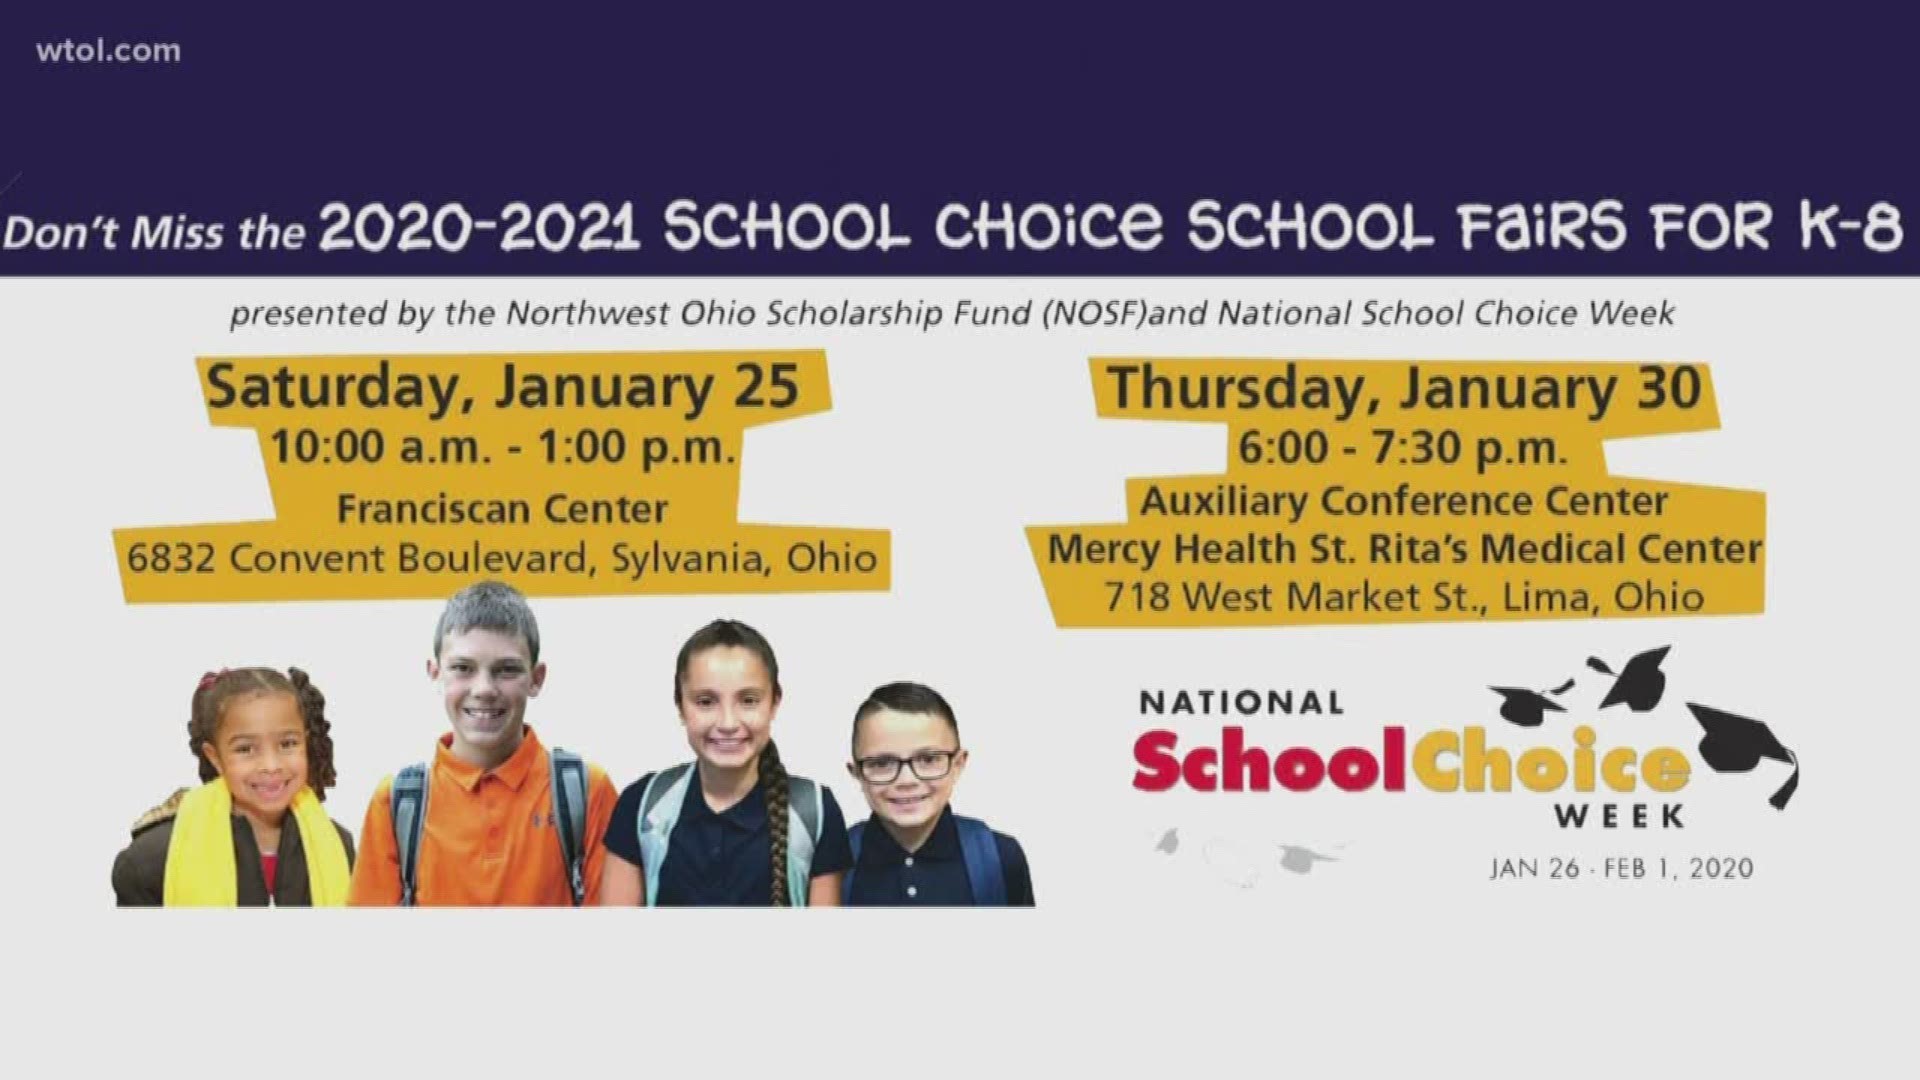 Parents now have lots of choices when it comes to choosing a school for their children. Next week is School Choice Week; here's more on education options!